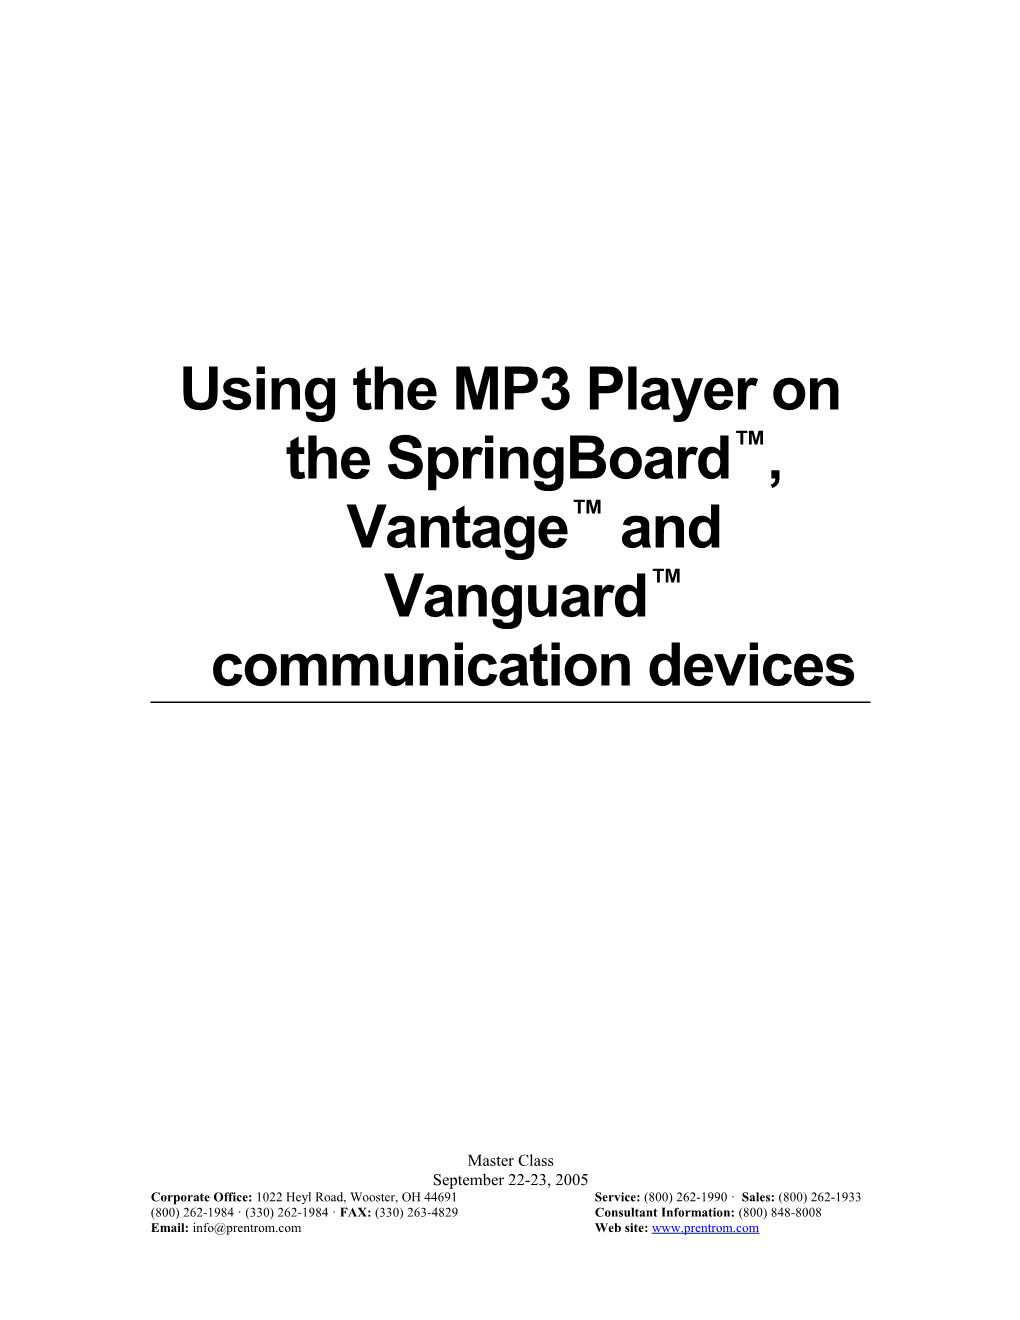 Using the MP3 Player on the Springboard , Vantage and Vanguard Communication Devices